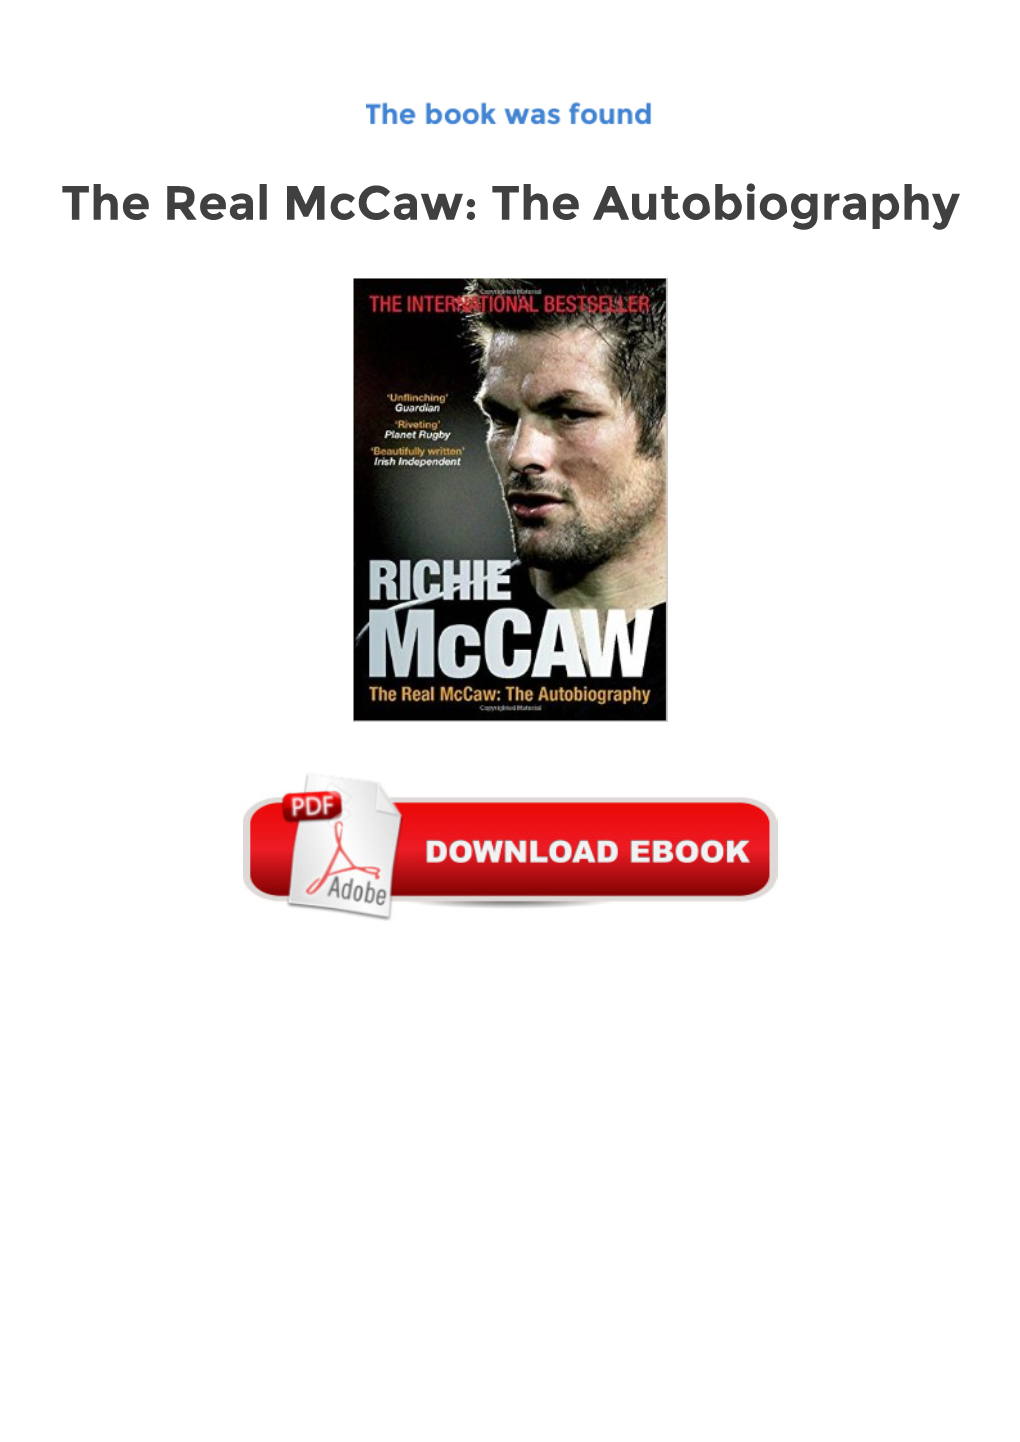 The Real Mccaw: the Autobiography Download Free (EPUB, PDF)